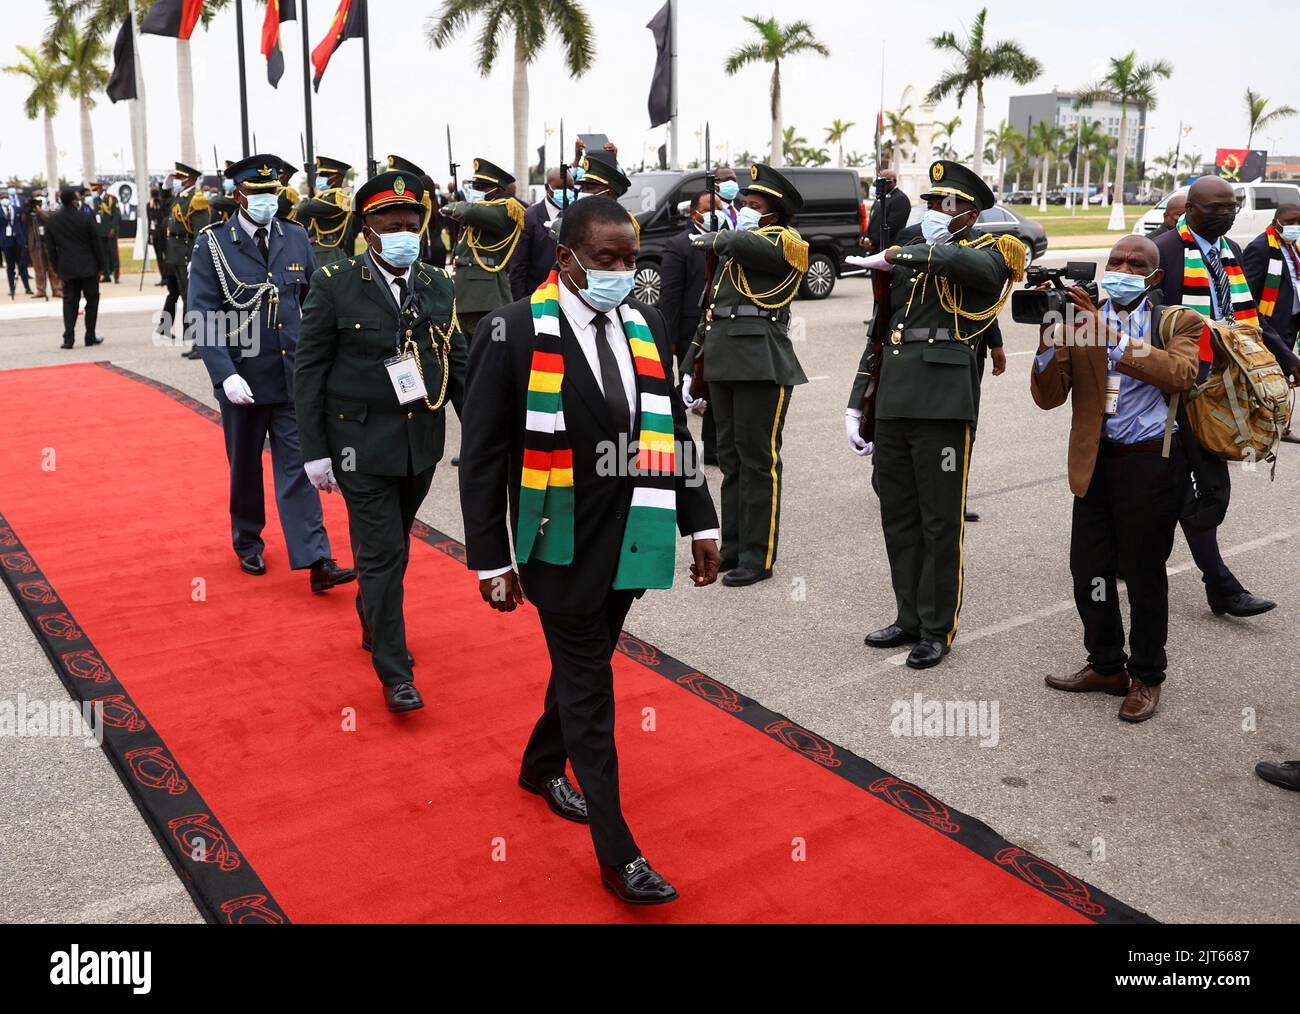 Zimbabwe's President Emmerson Mnangagwa arrives for the funeral of Angola's former President Jose Eduardo dos Santos, who died in Spain in July, at the Agostinho Neto Memorial, in Luanda, Angola, August 28, 2022. REUTERS/Siphiwe Sibeko Stock Photo